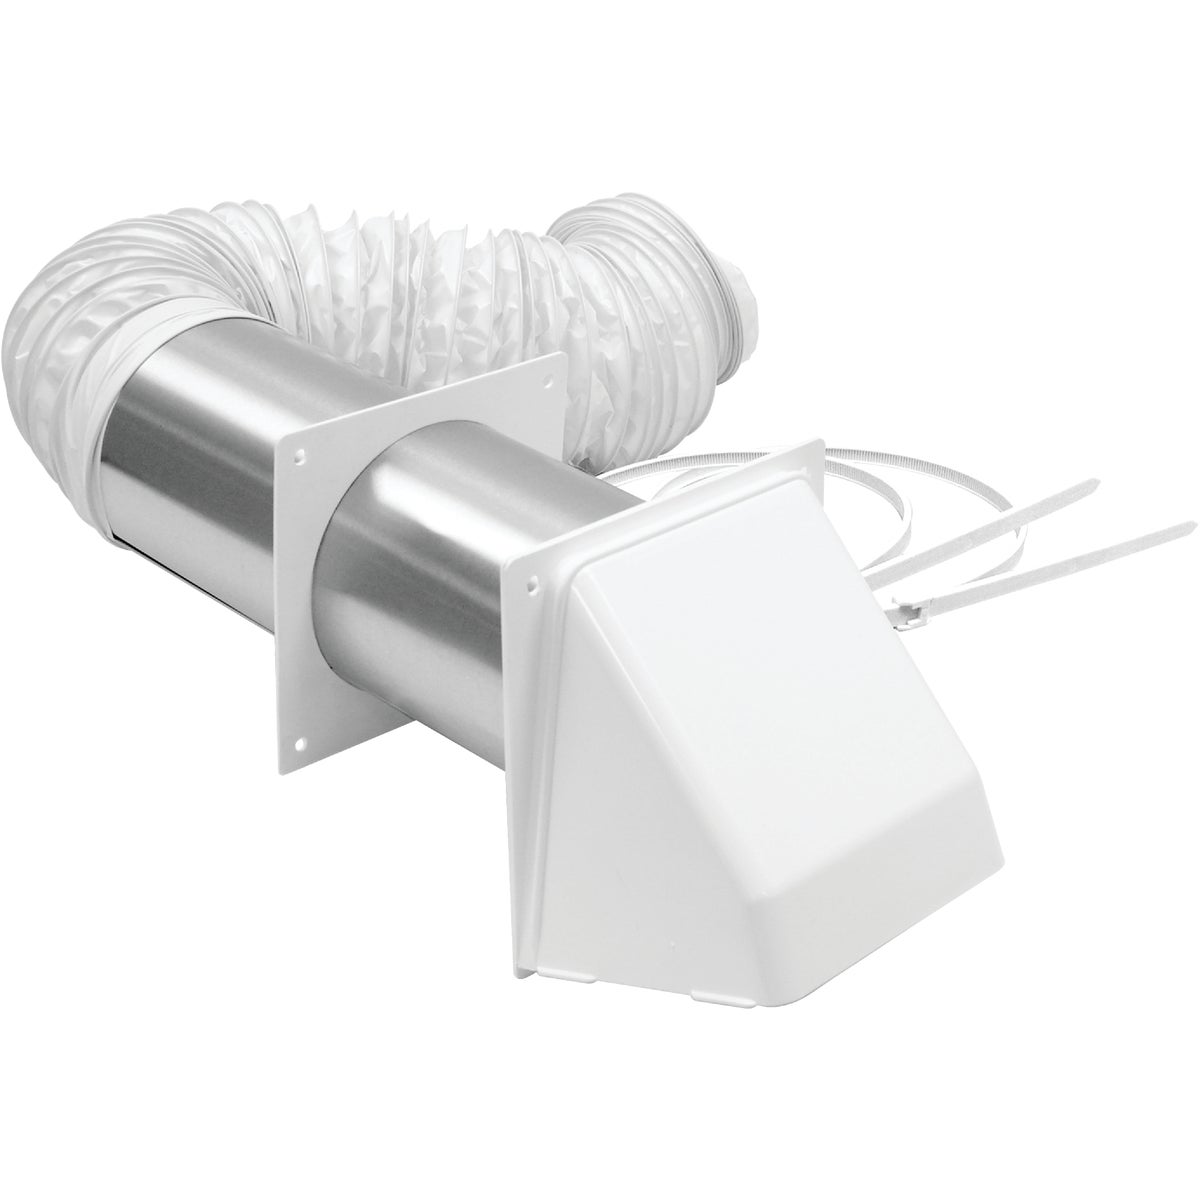 Item 260608, Wall ducting kit includes flexible vinyl hose, tailpiece, 4 In.